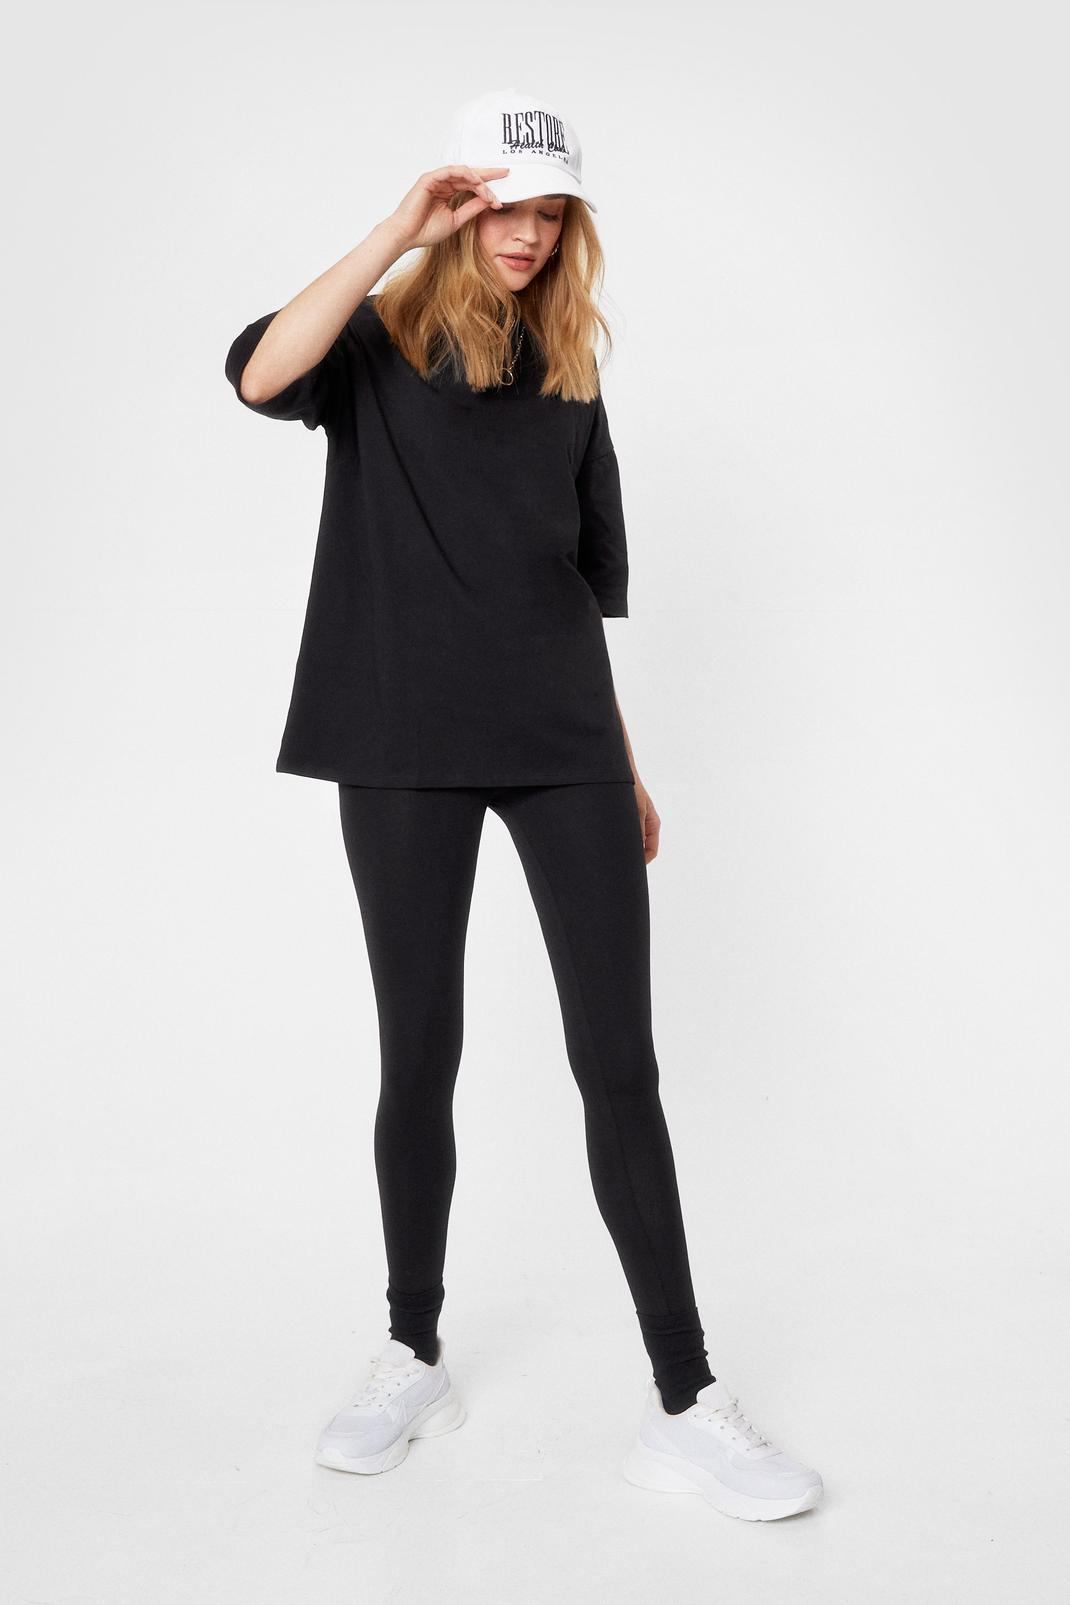 Match made in heaven. The perfect tshirt snd leggings! #oversizedtshir, Oversized T-Shirts